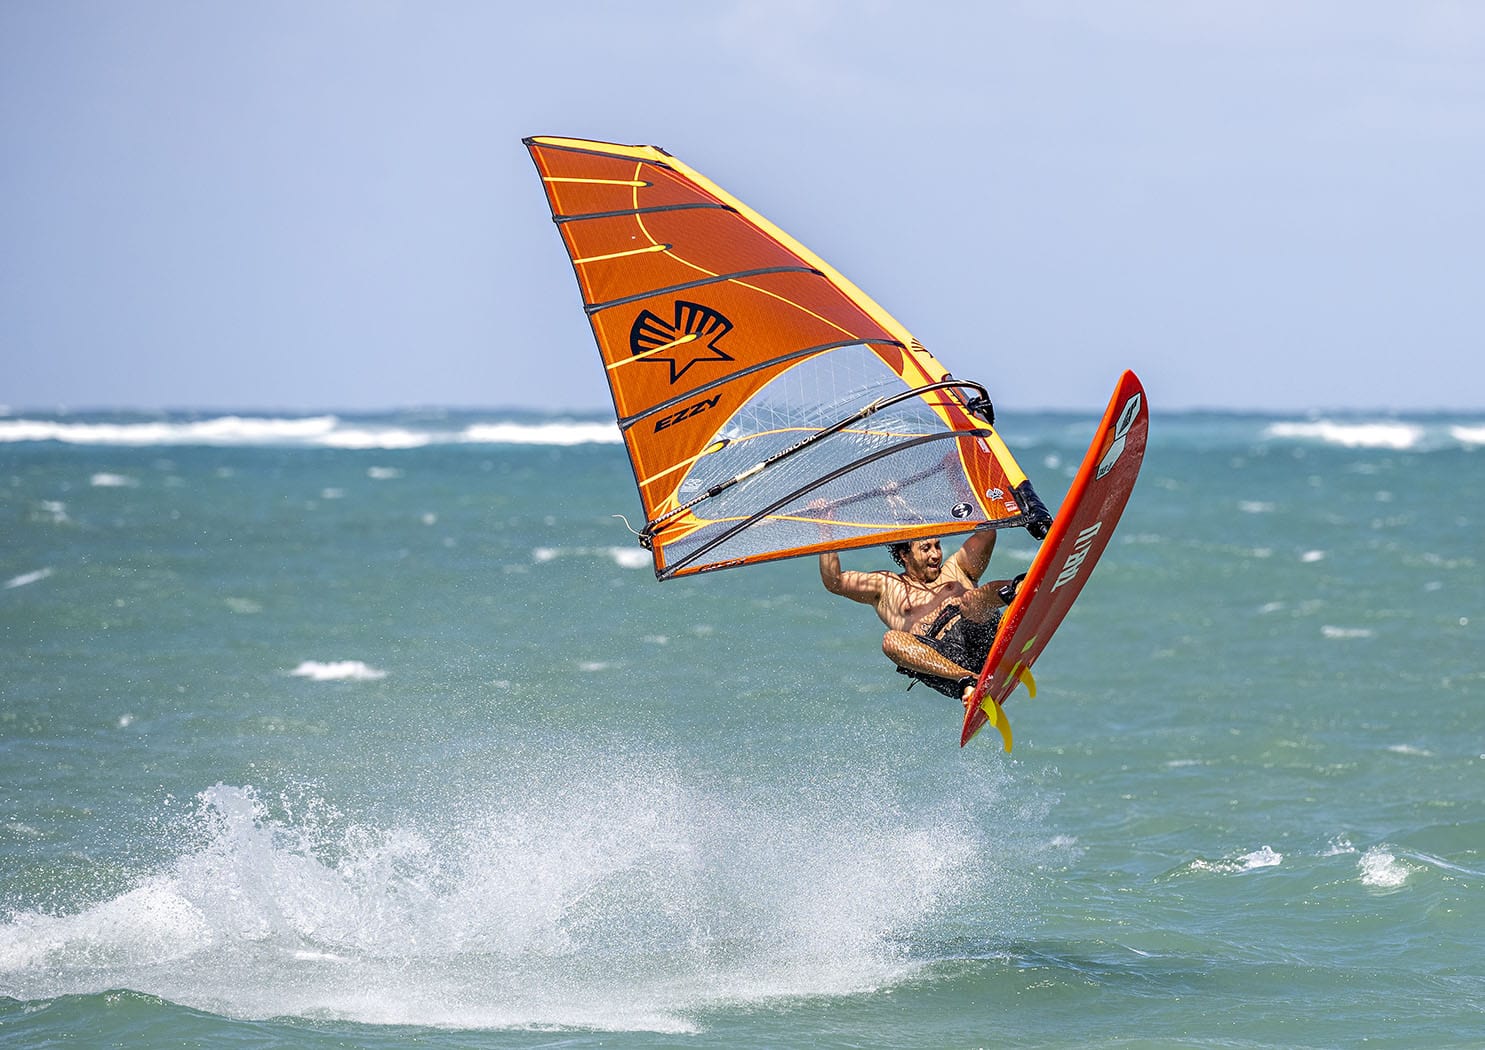 Ezzy Sails - Cross - Worthing Watersports - - Ezzy Sails